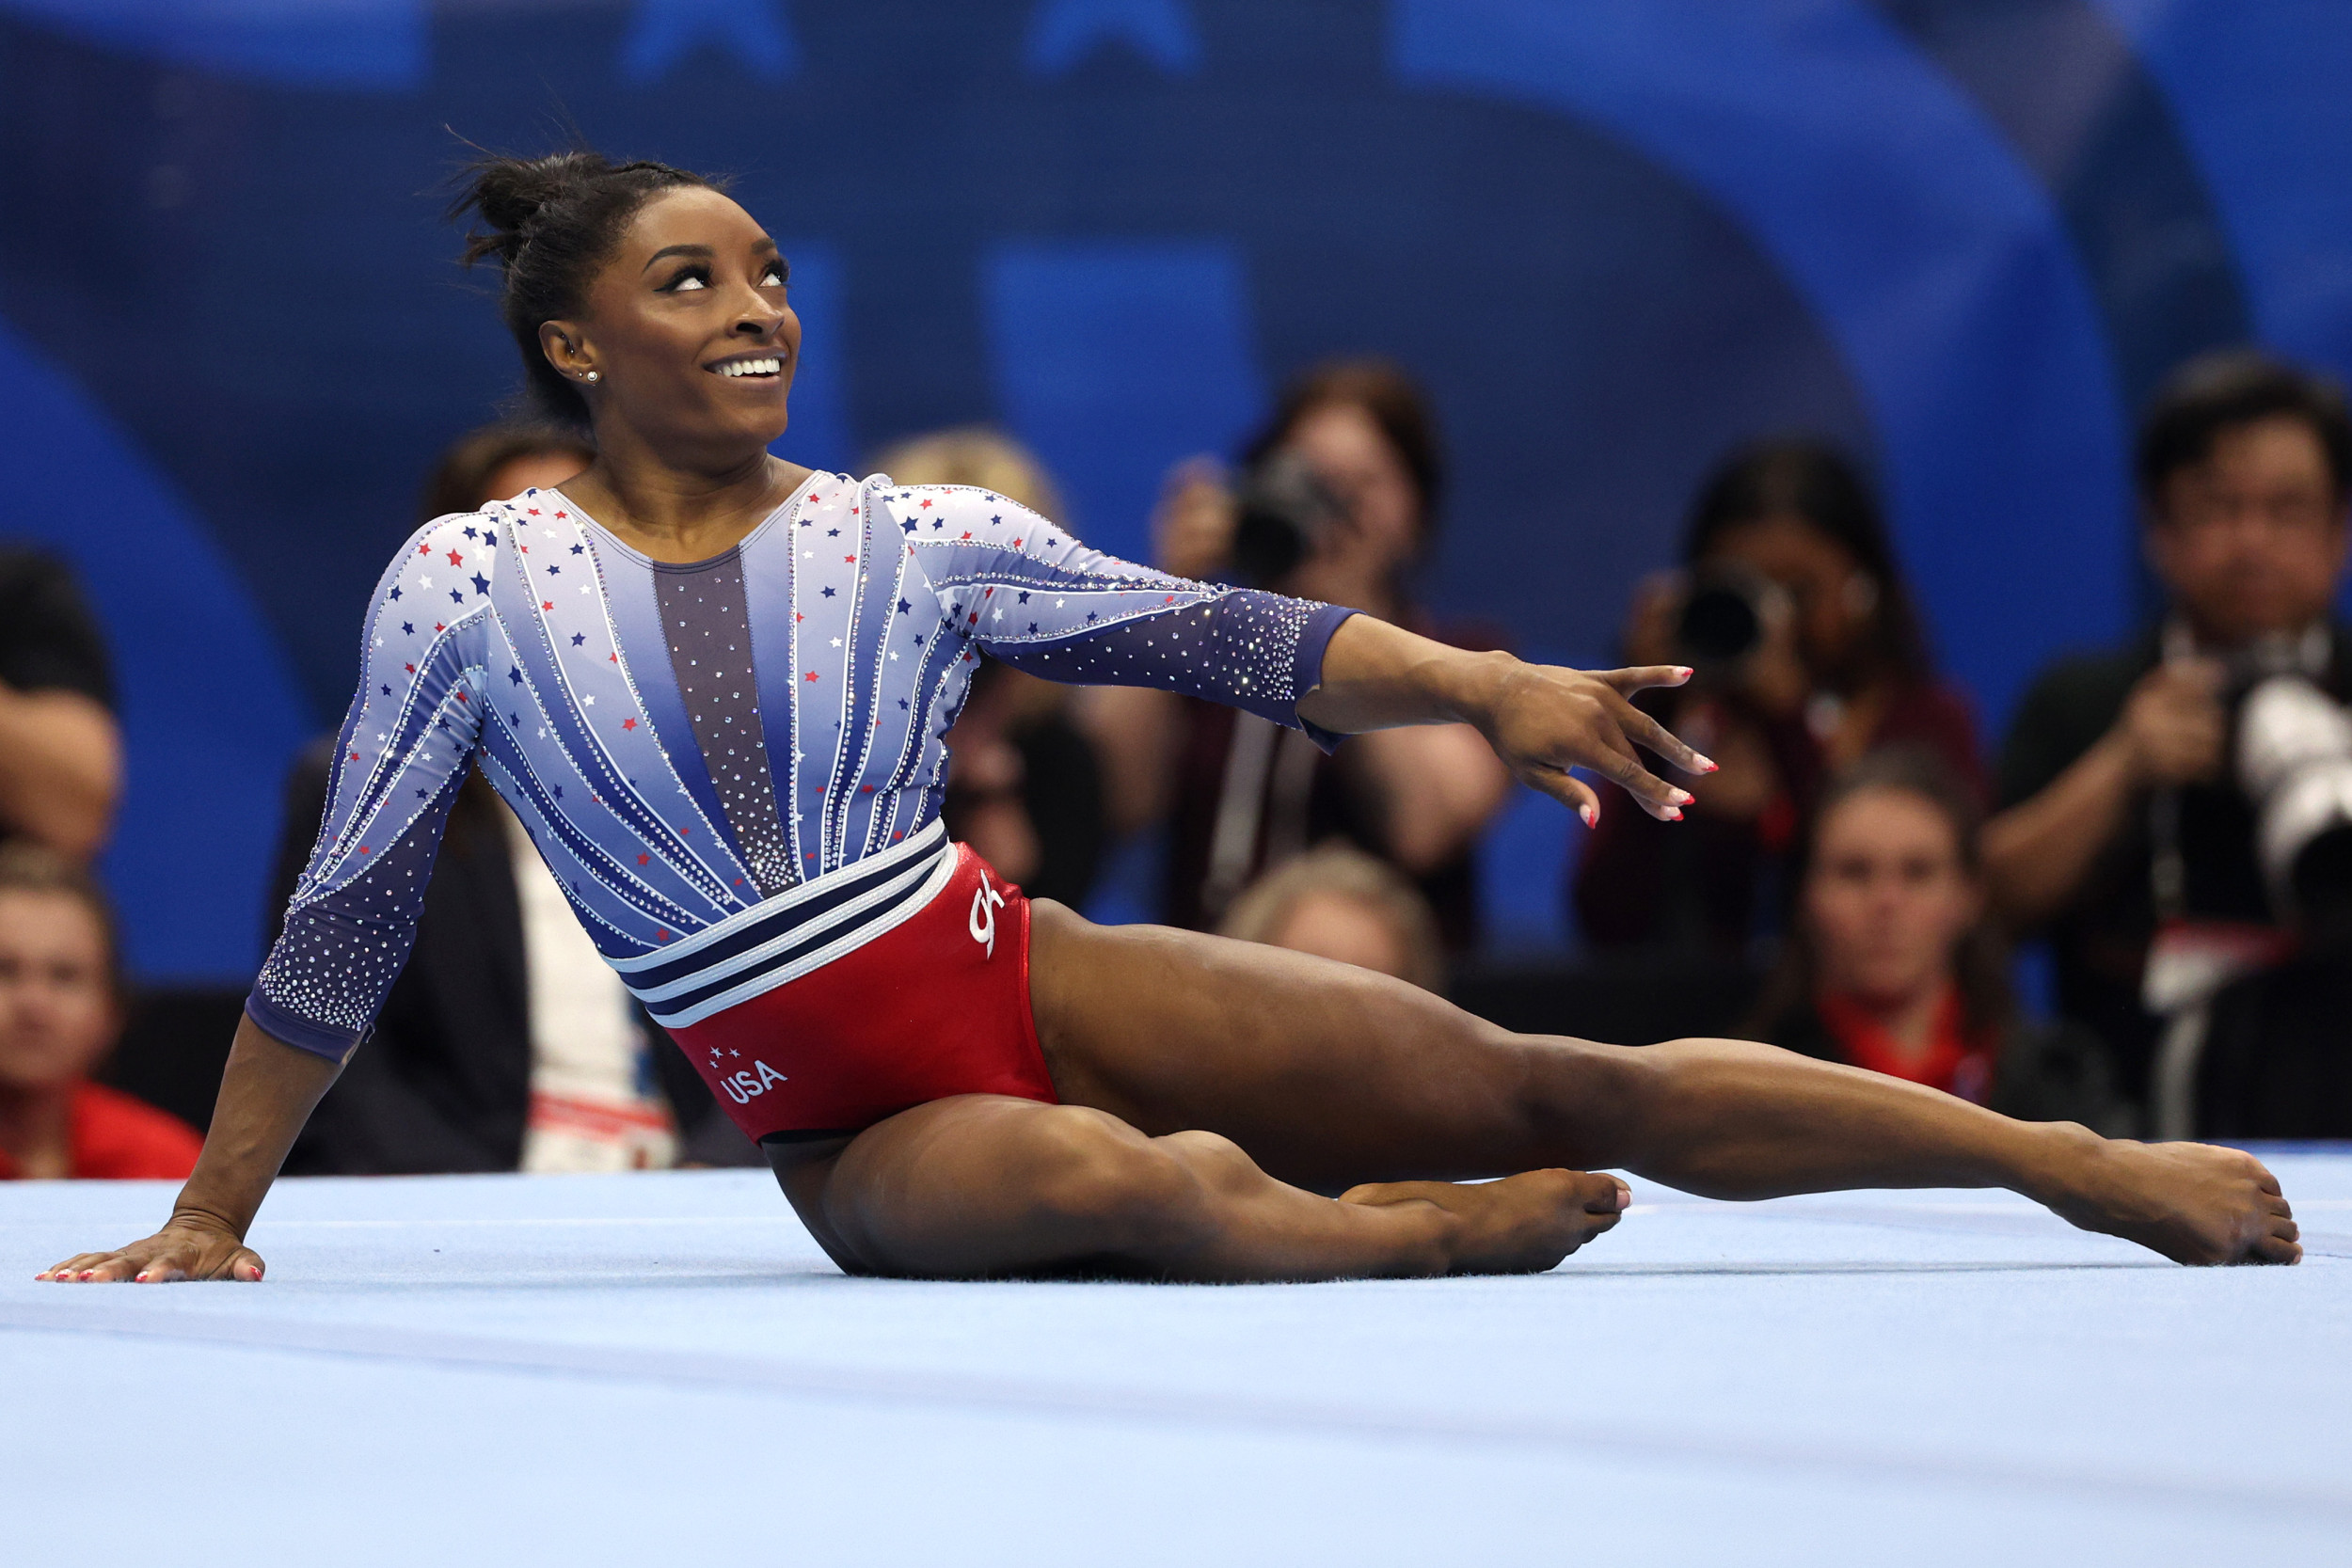 Why Simone Biles’ floor routine caught Taylor Swift’s attention